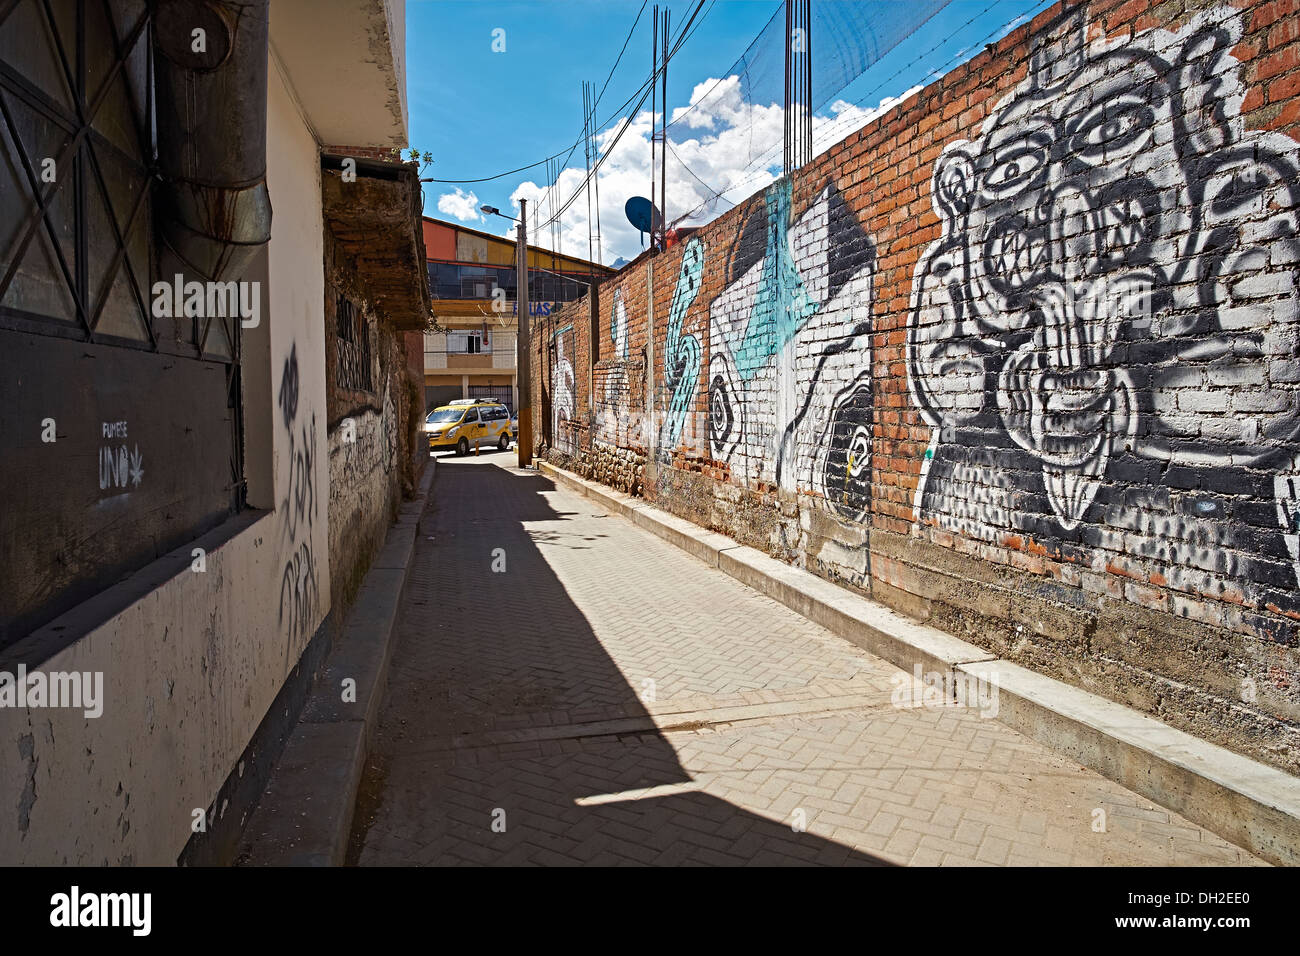 Street art on the streets of Huaraz In Peru, South America. Stock Photo